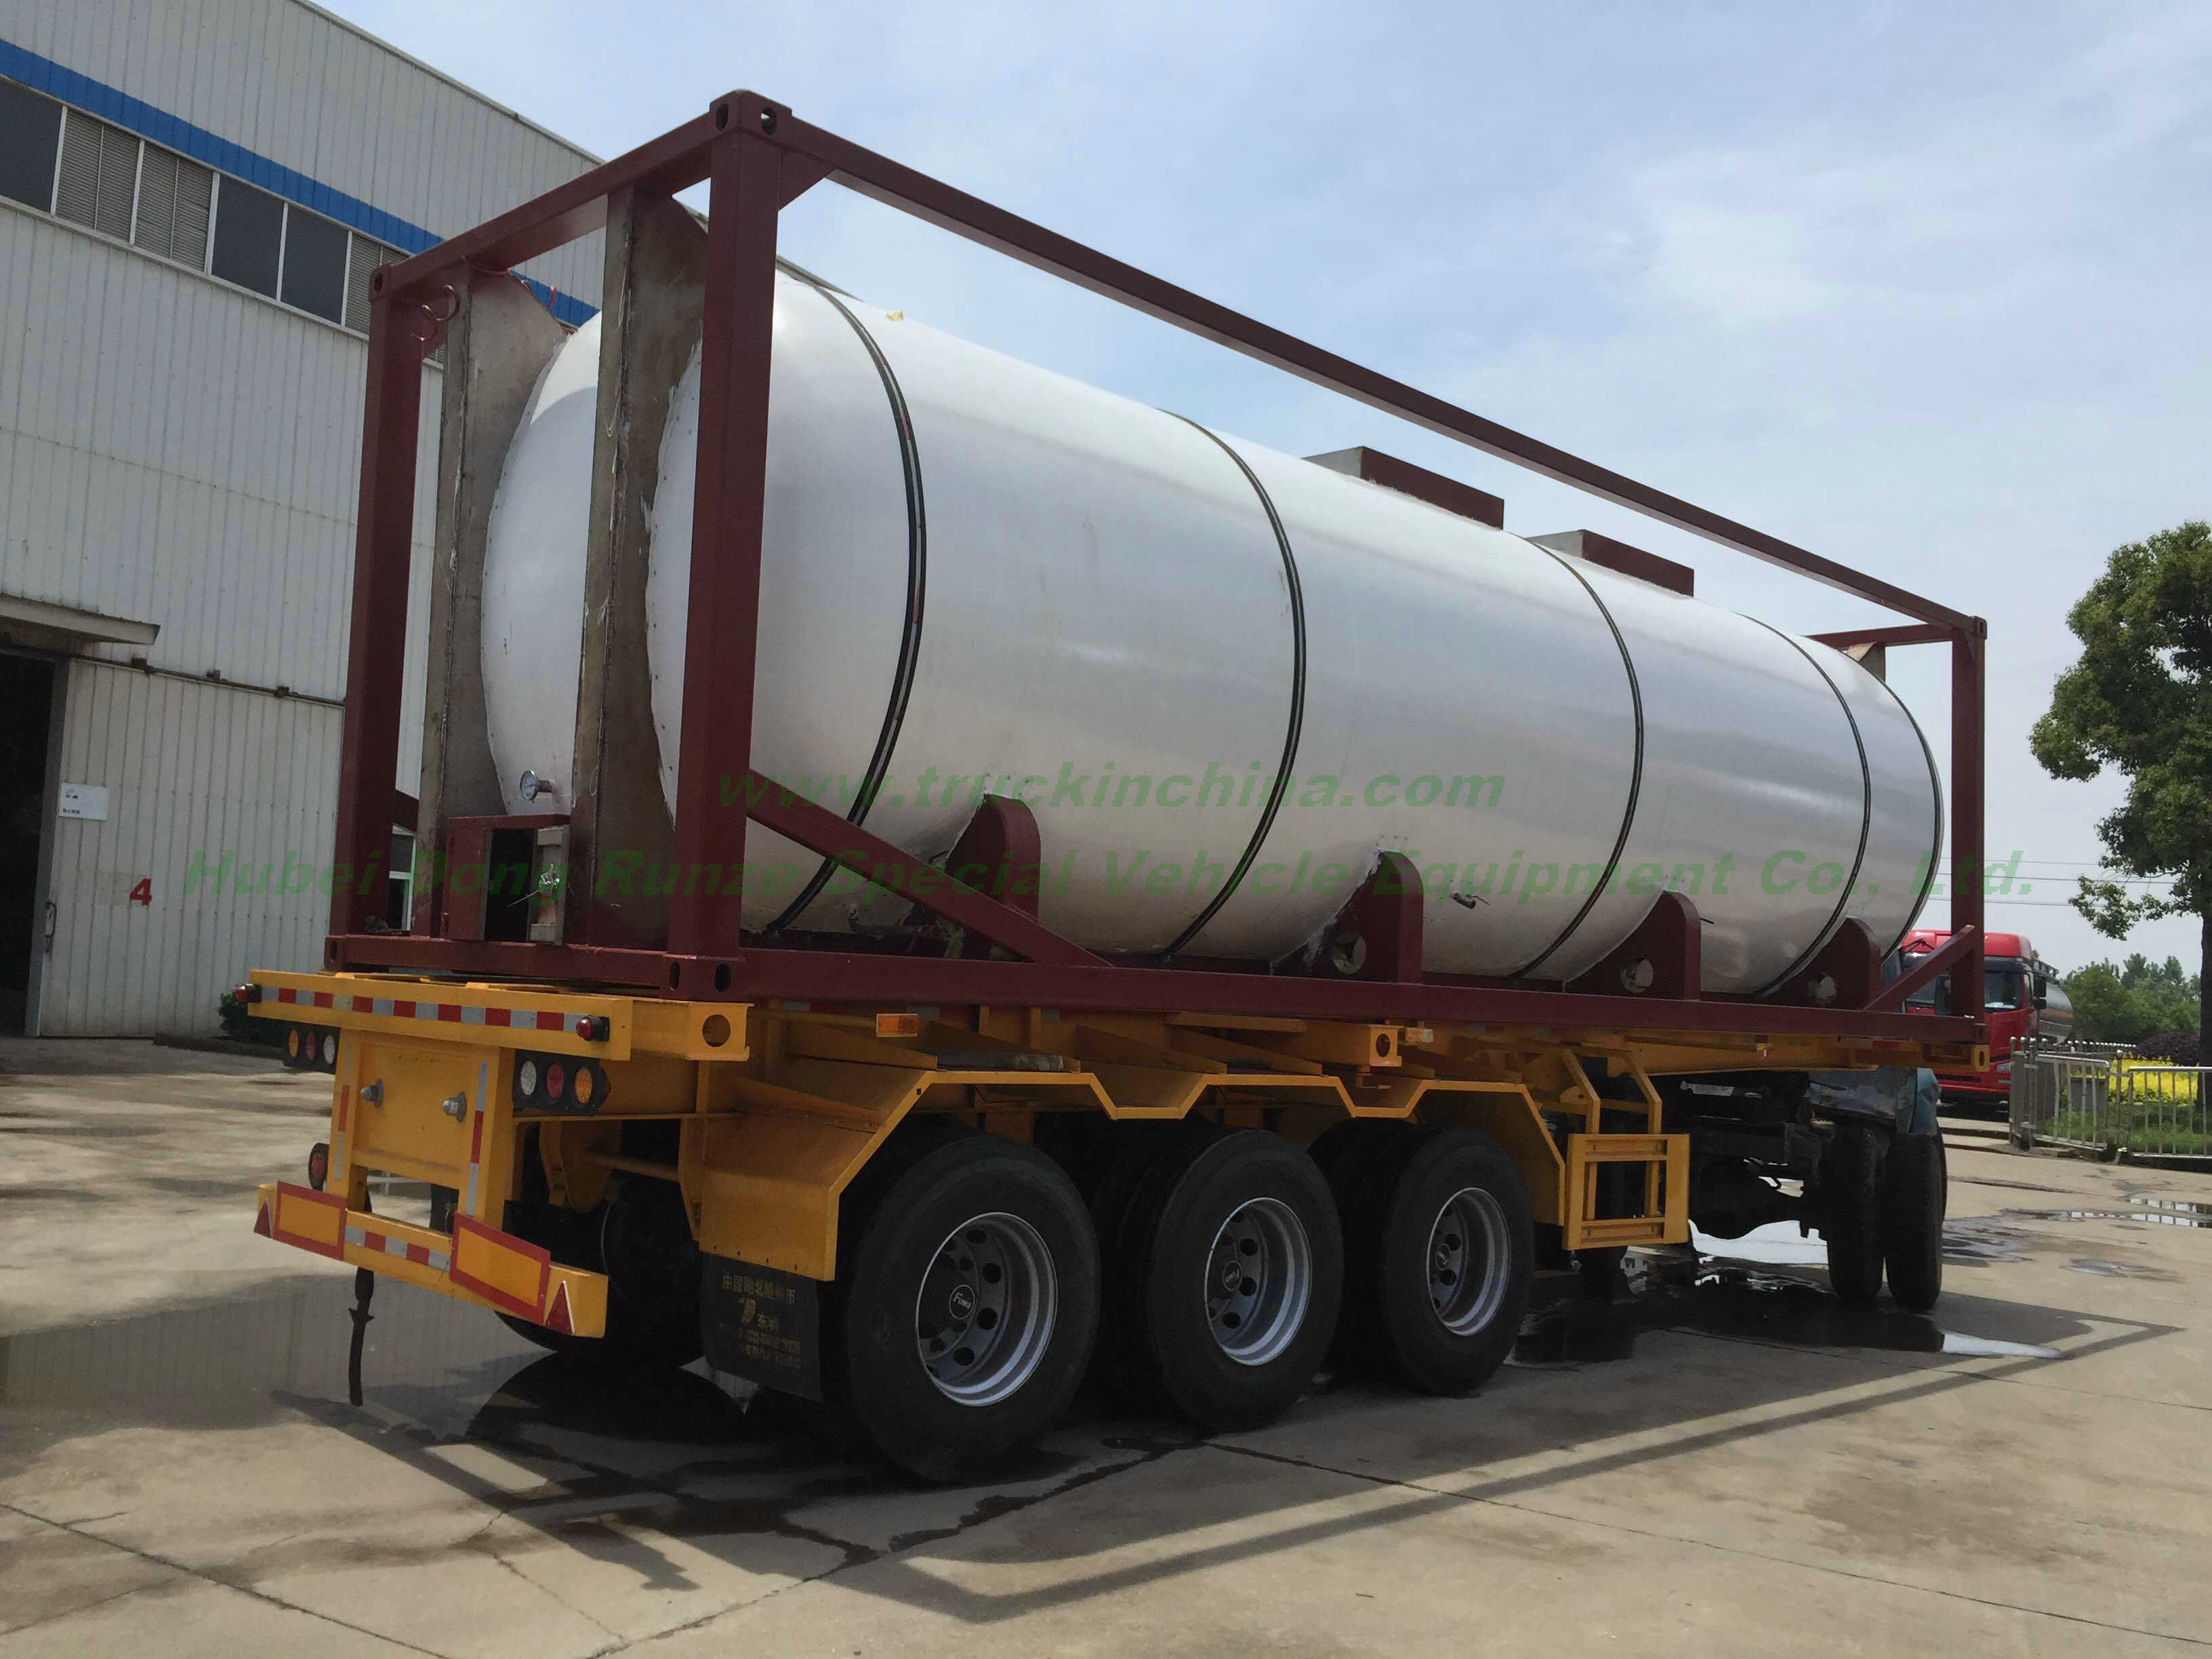 30FT T 4, T7 Stainless Steel Steam Heated Syrup Tank Container for Food Products 